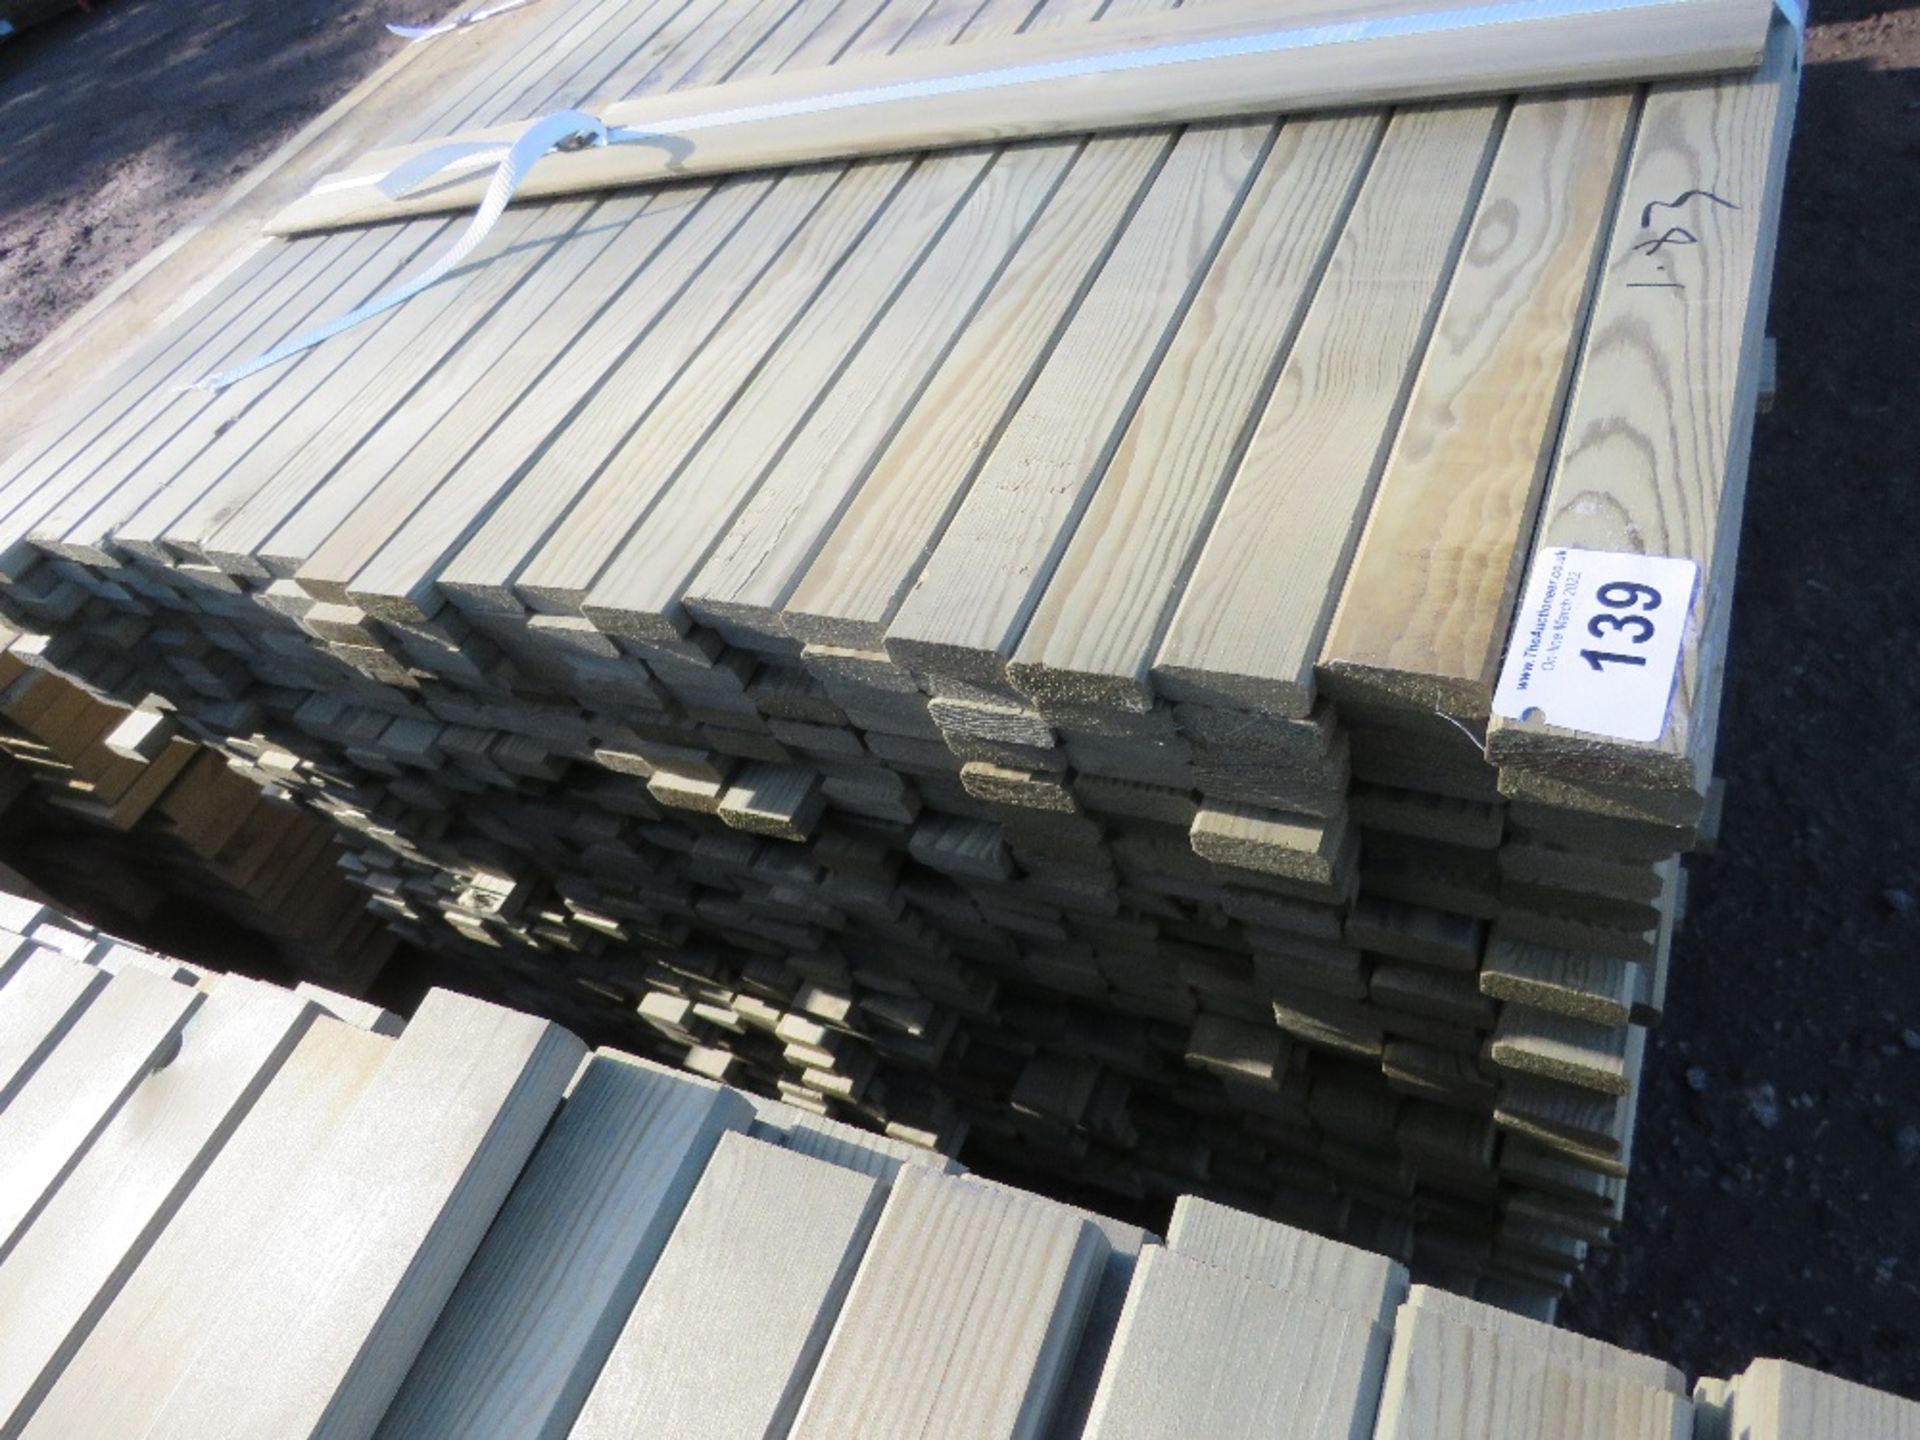 LARGE PACK OF PRESSURE TREATED VENETIAN CLADDING TIMBER SLATS. LENGTH 1.83M X 45MM WIDTH X 17MM DEPT - Image 2 of 3